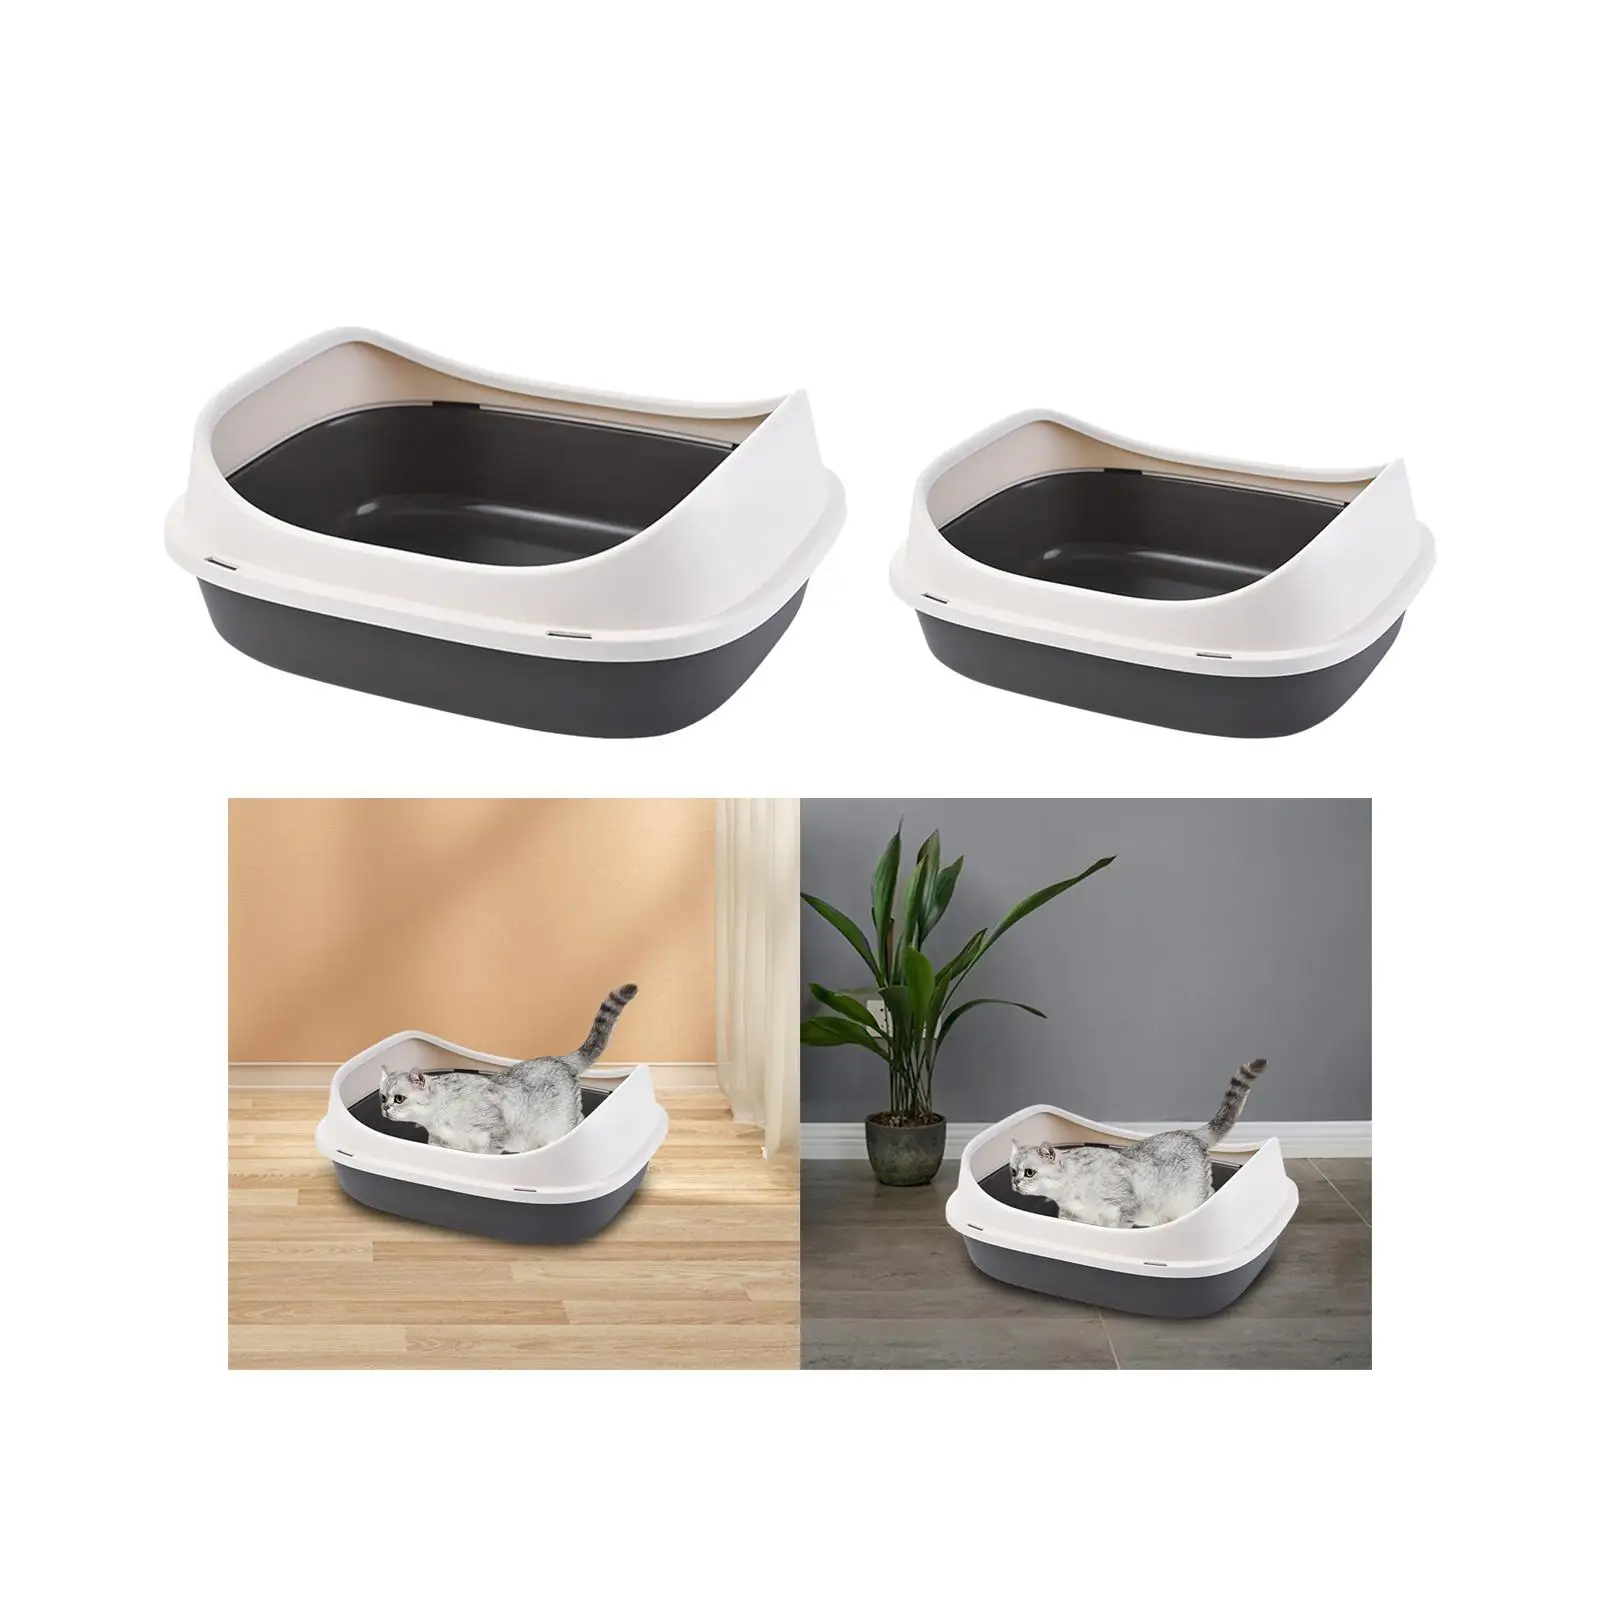 Open Top Cat Litter Box Pet Bedpan with Scatter Shield and Scoop Litter Pan for Kitty Small Medium Cats Pets Bunny Rabbit